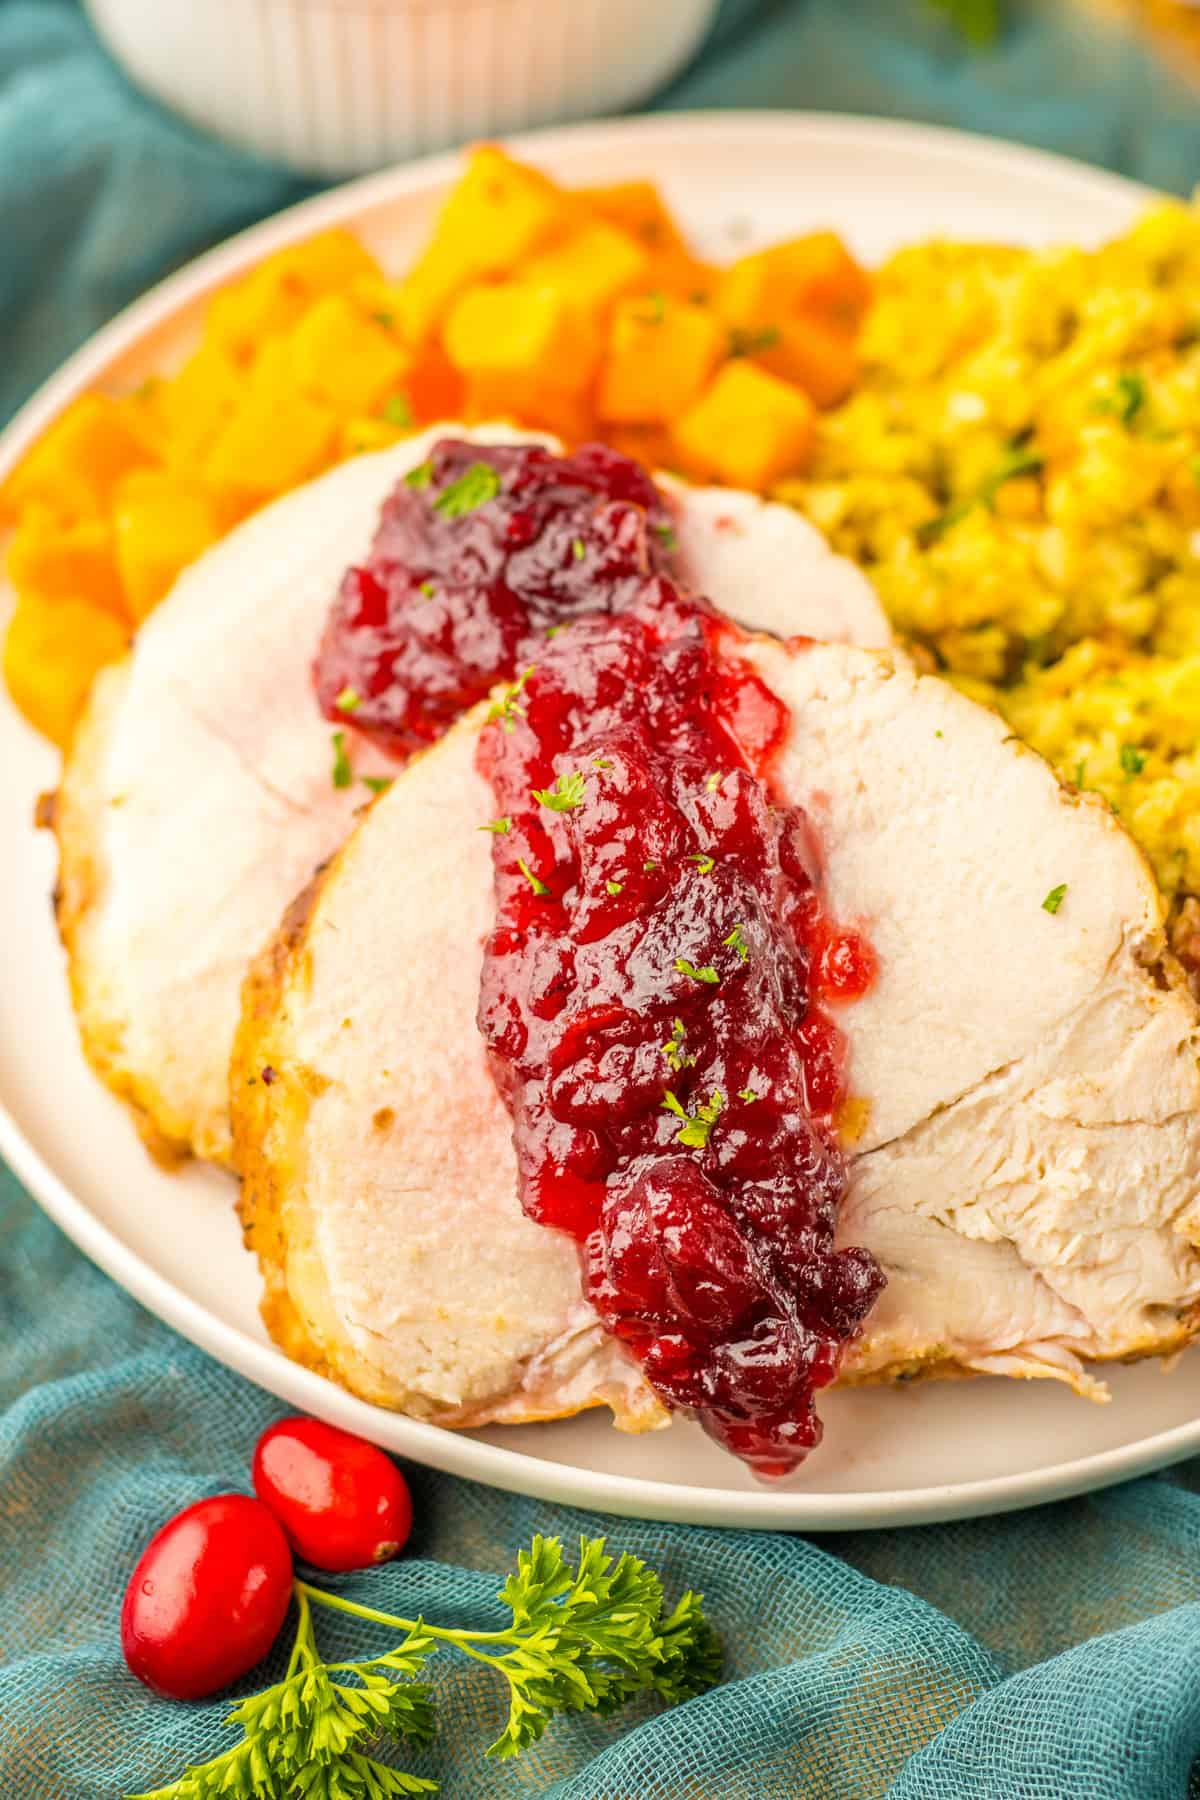 Slow cooked boneless turkey breast topped with cranberry sauce and served with stuffing and sweet potatoes.